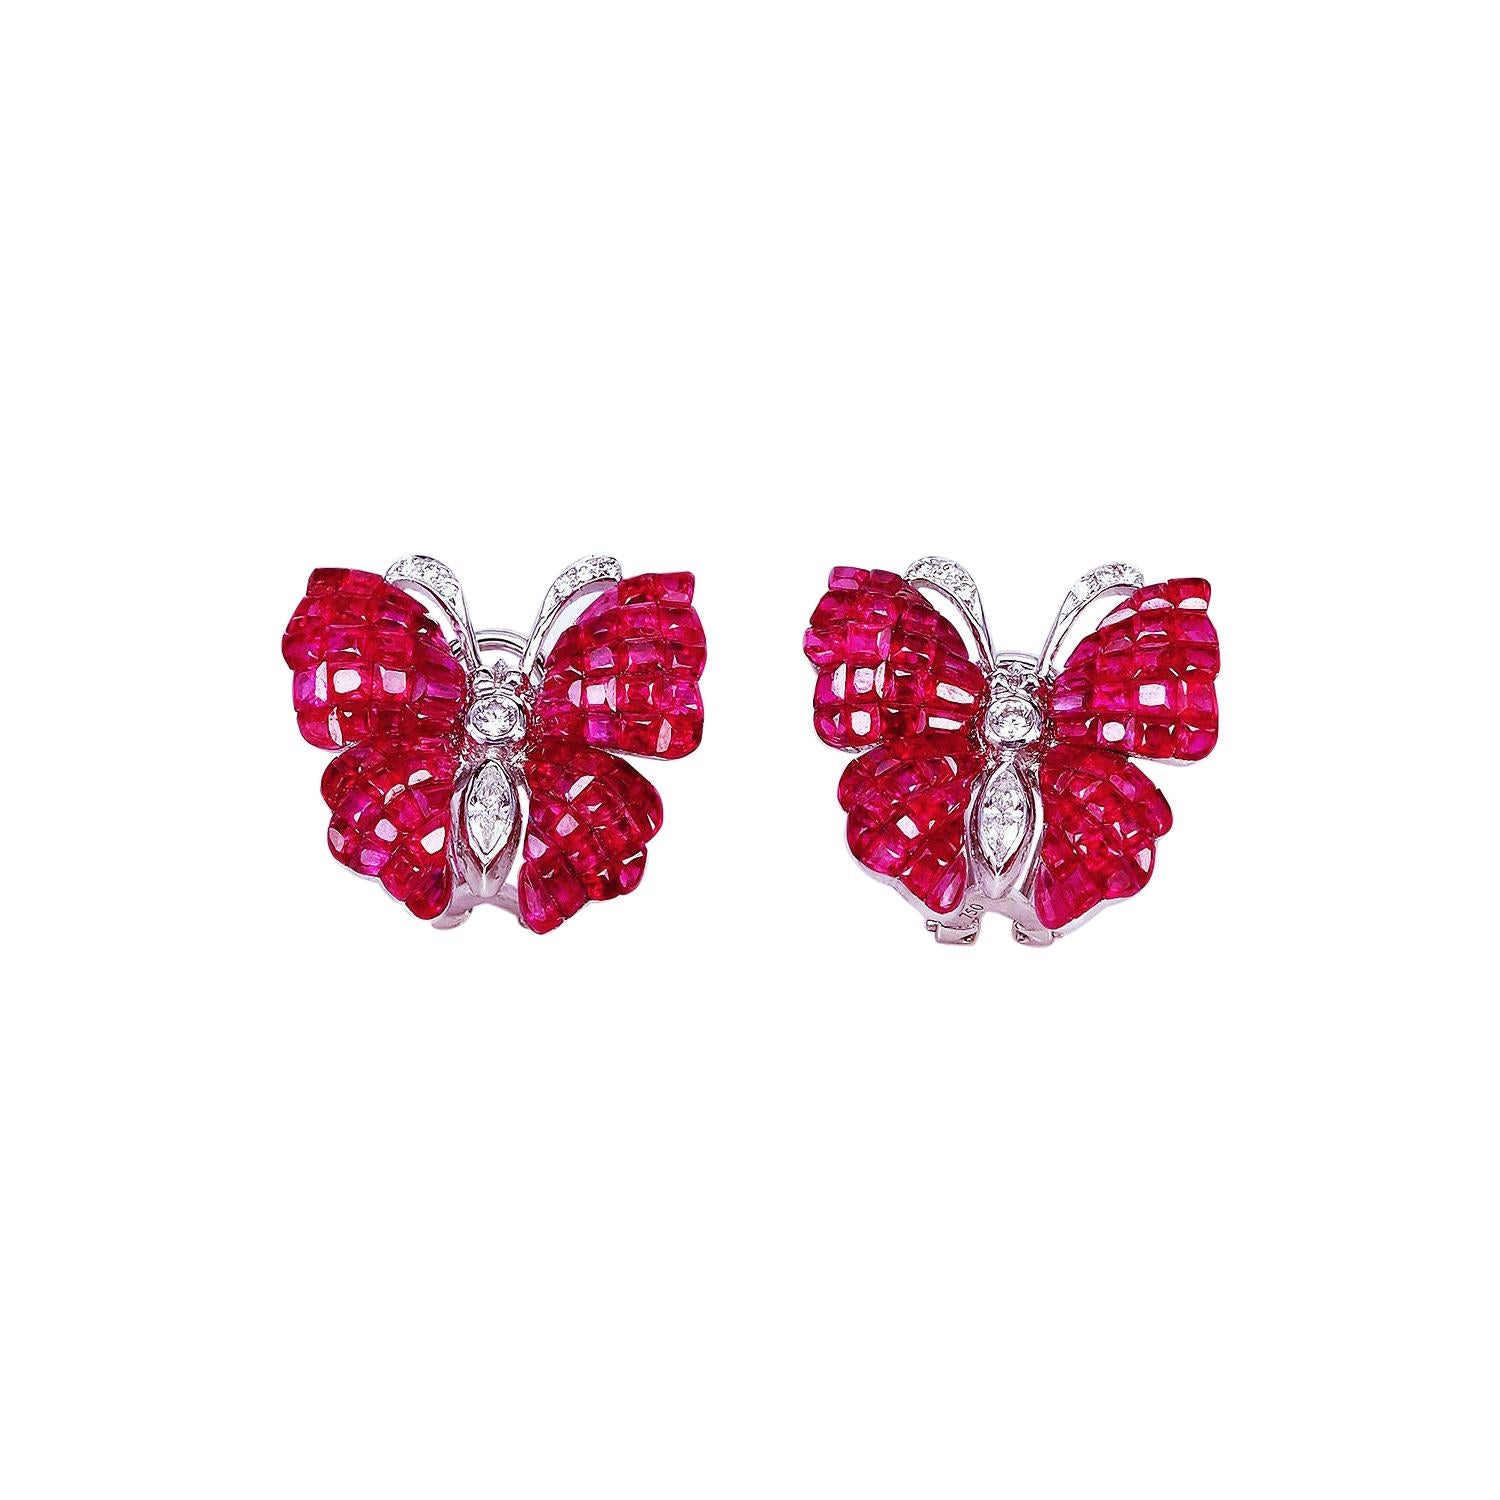 18K White gold invisible Ruby Dangling Earrings For Sale at 